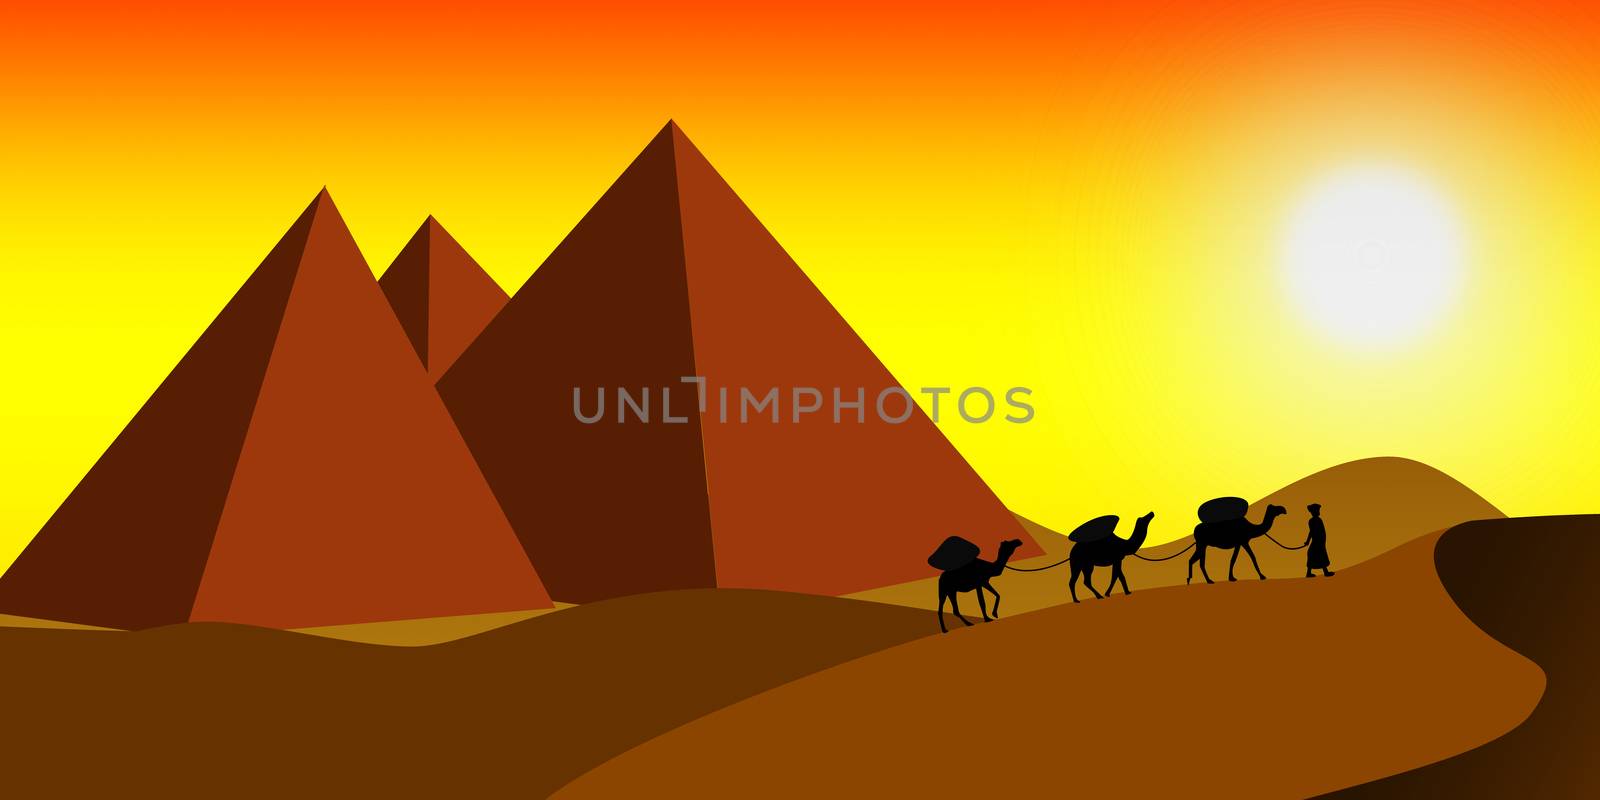 Pyramids with camels walking in the desert, 3D rendering